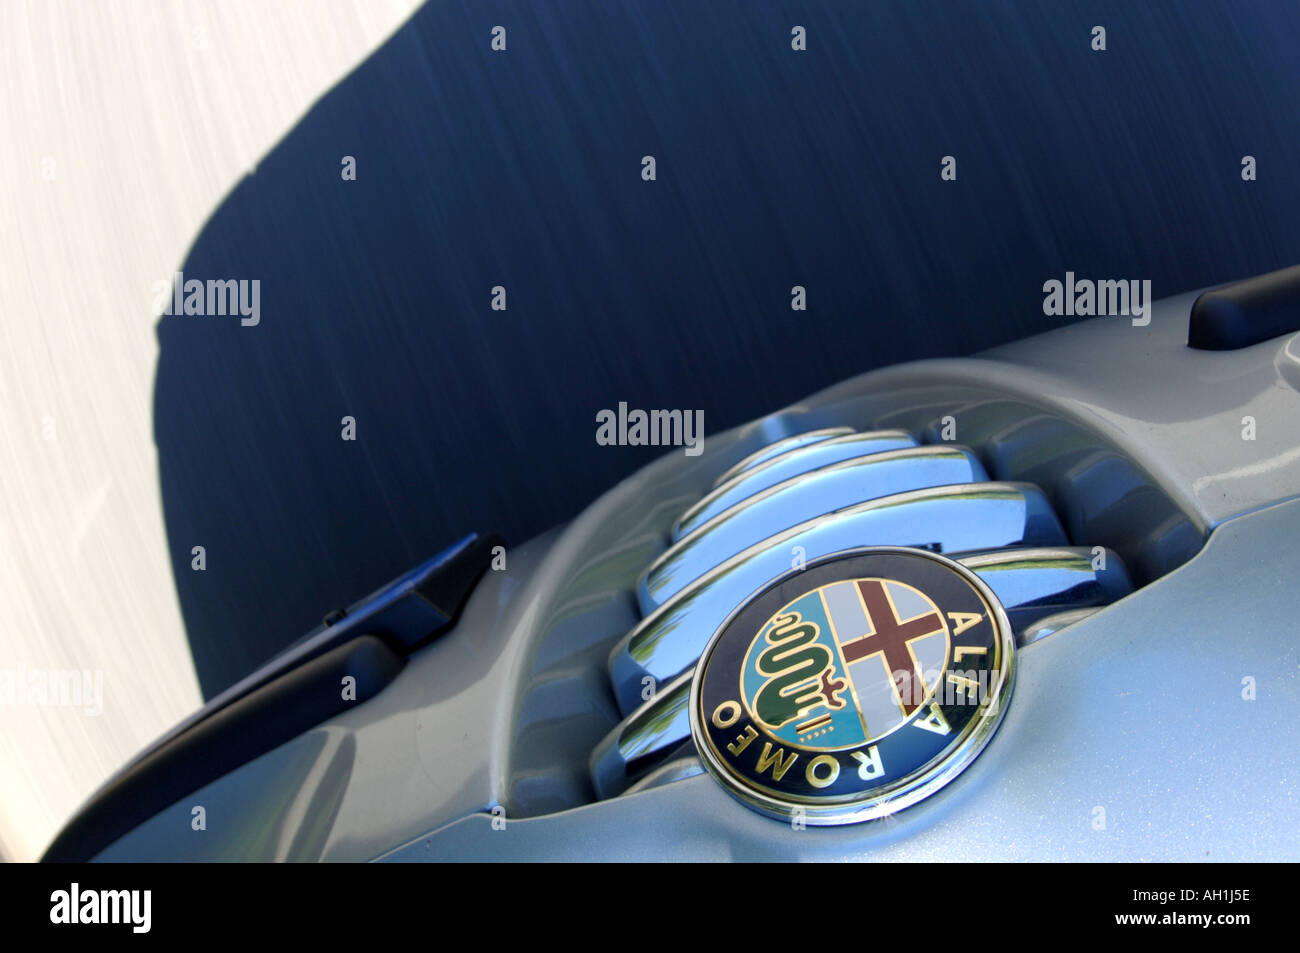 Alfa Romeo 147 badge and grill speeds along the road suction mount abstract Stock Photo